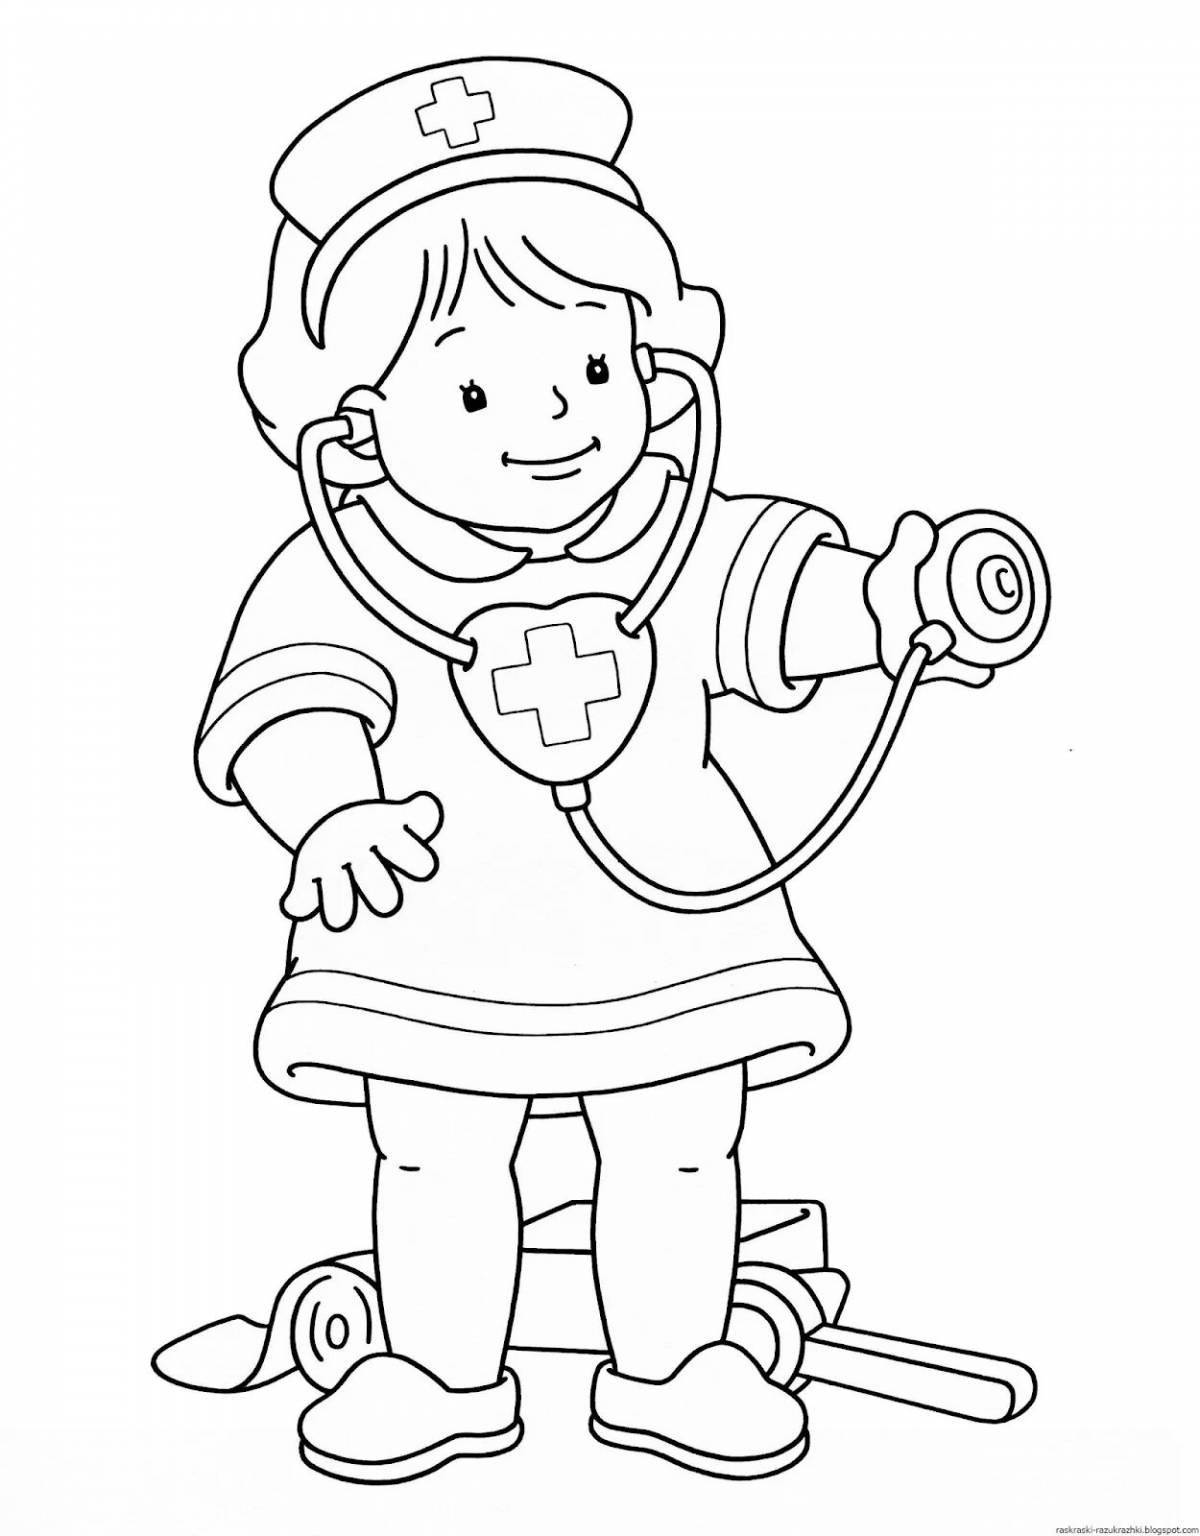 Colorful job coloring pages for imaginative